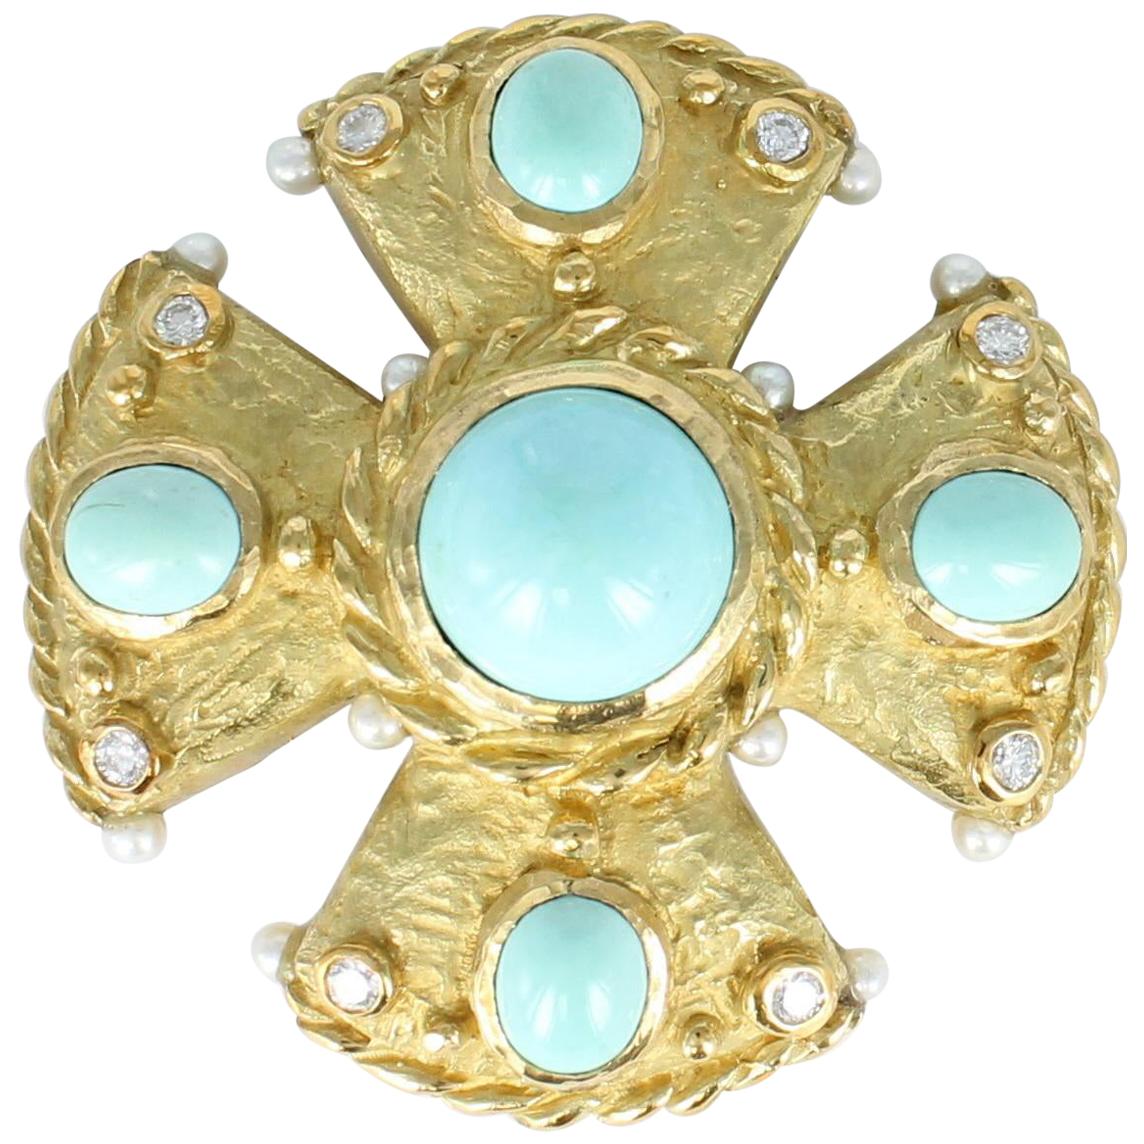 Katy Briscoe Turquoise Maltese Cross Design Brooch-Pin with Diamonds and Pearls For Sale